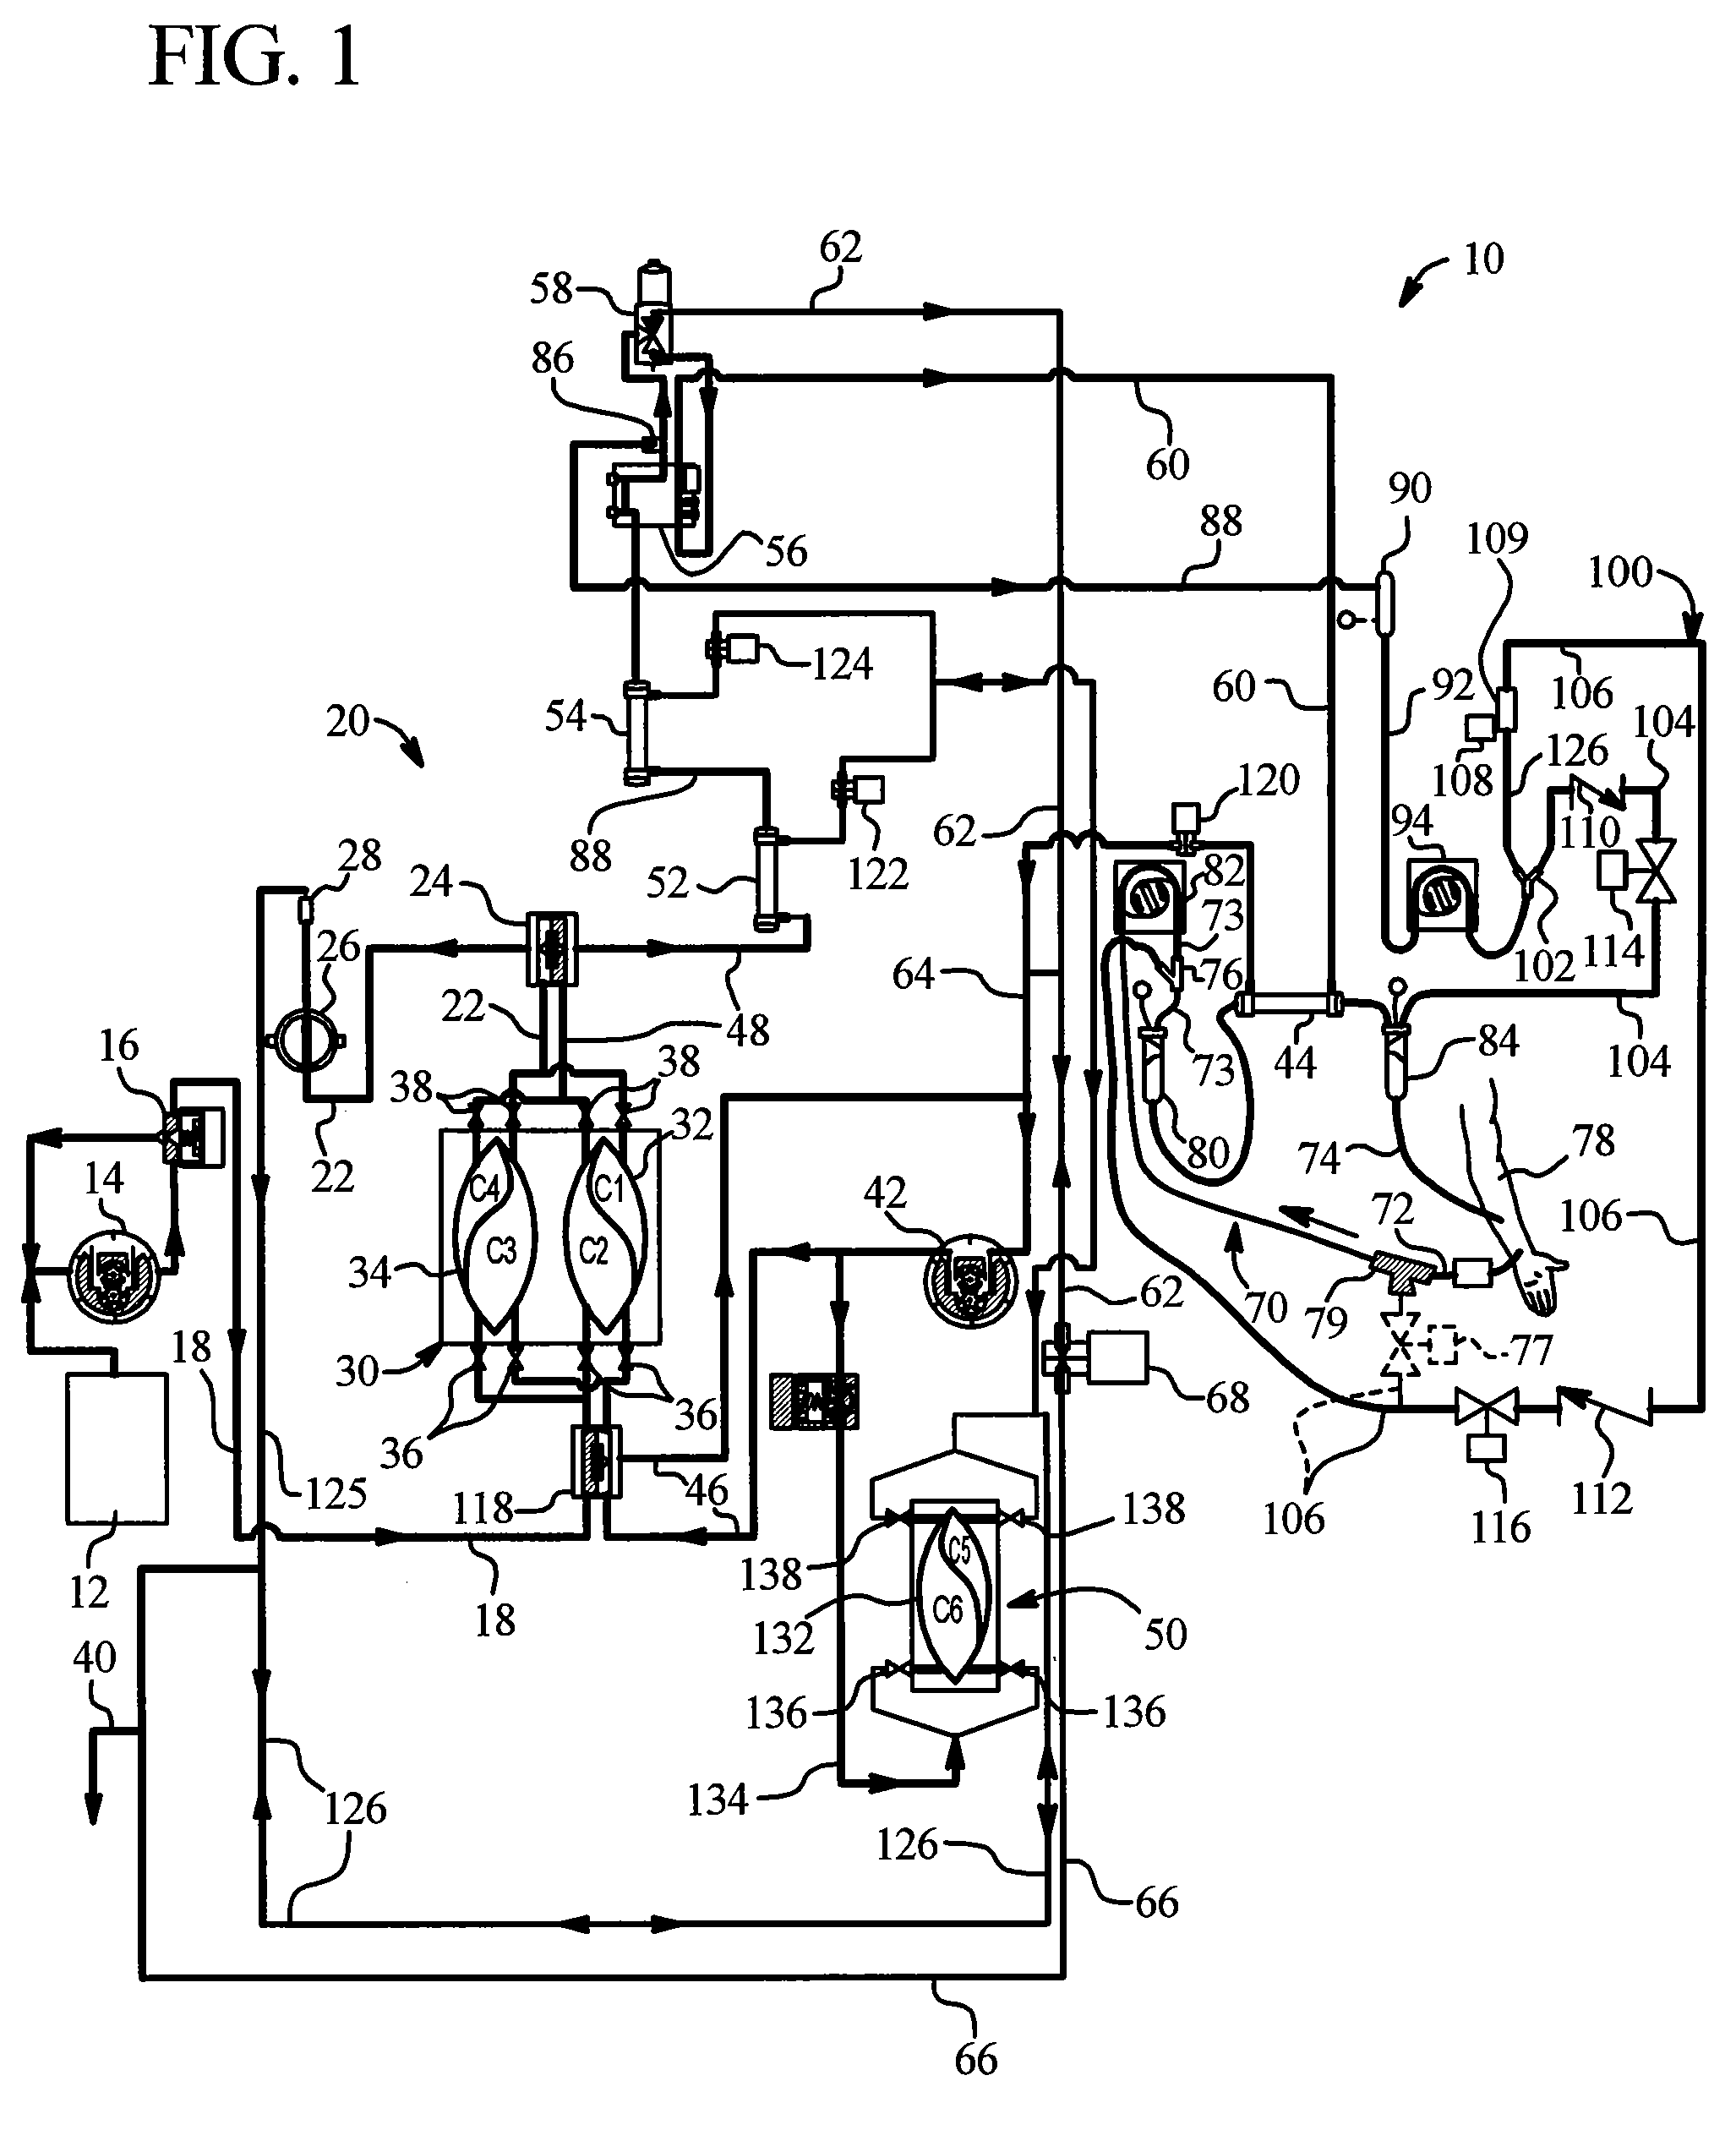 Medical fluid therapy flow control systems and methods